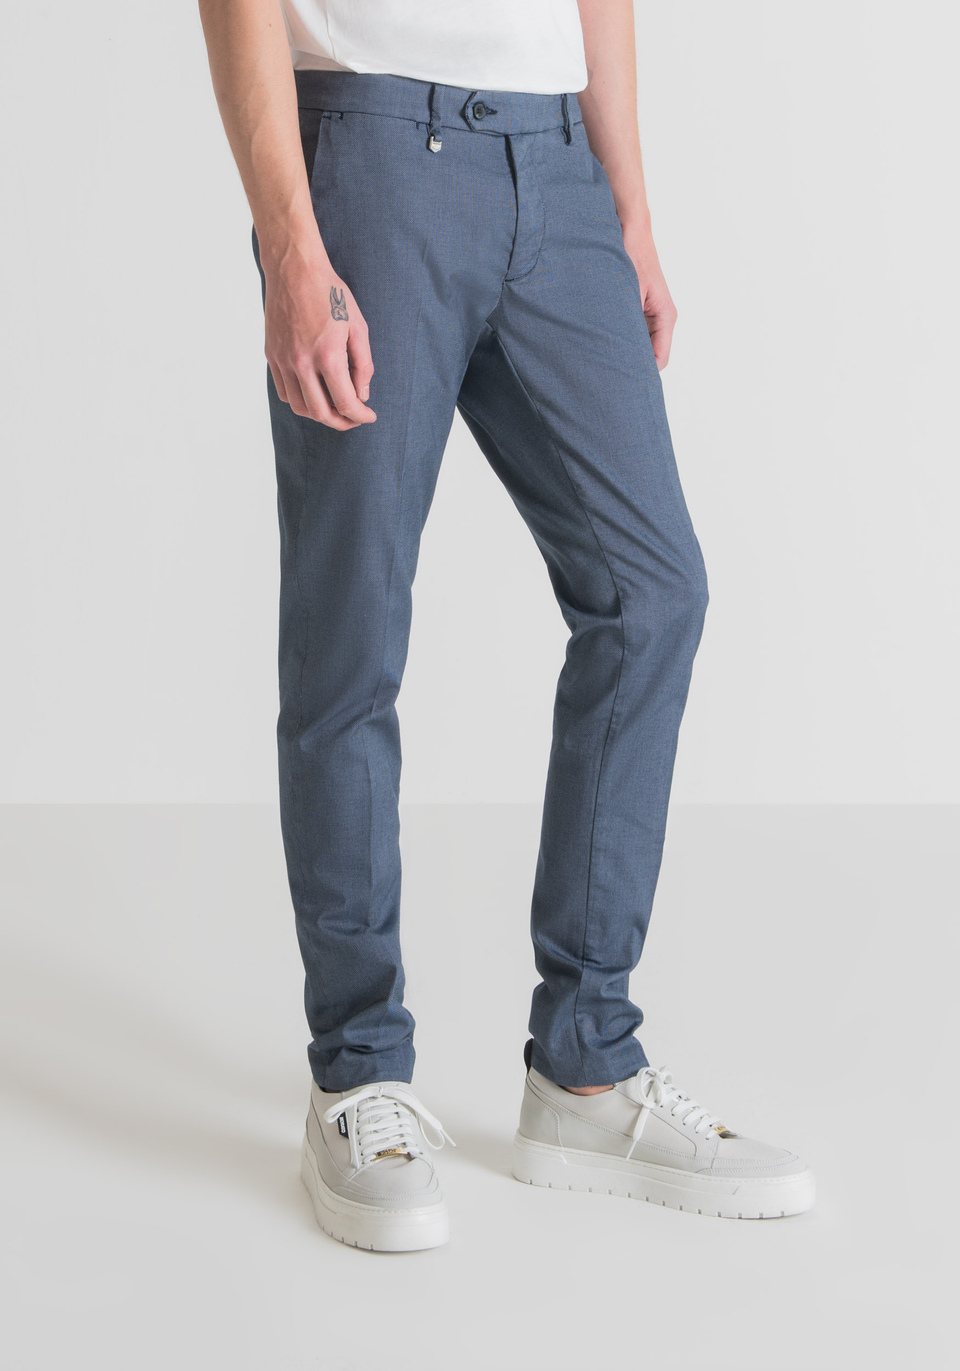 "BRYAN" SKINNY-FIT TROUSERS IN MICRO-WEAVE STRETCH COTTON BLEND - Antony Morato Online Shop